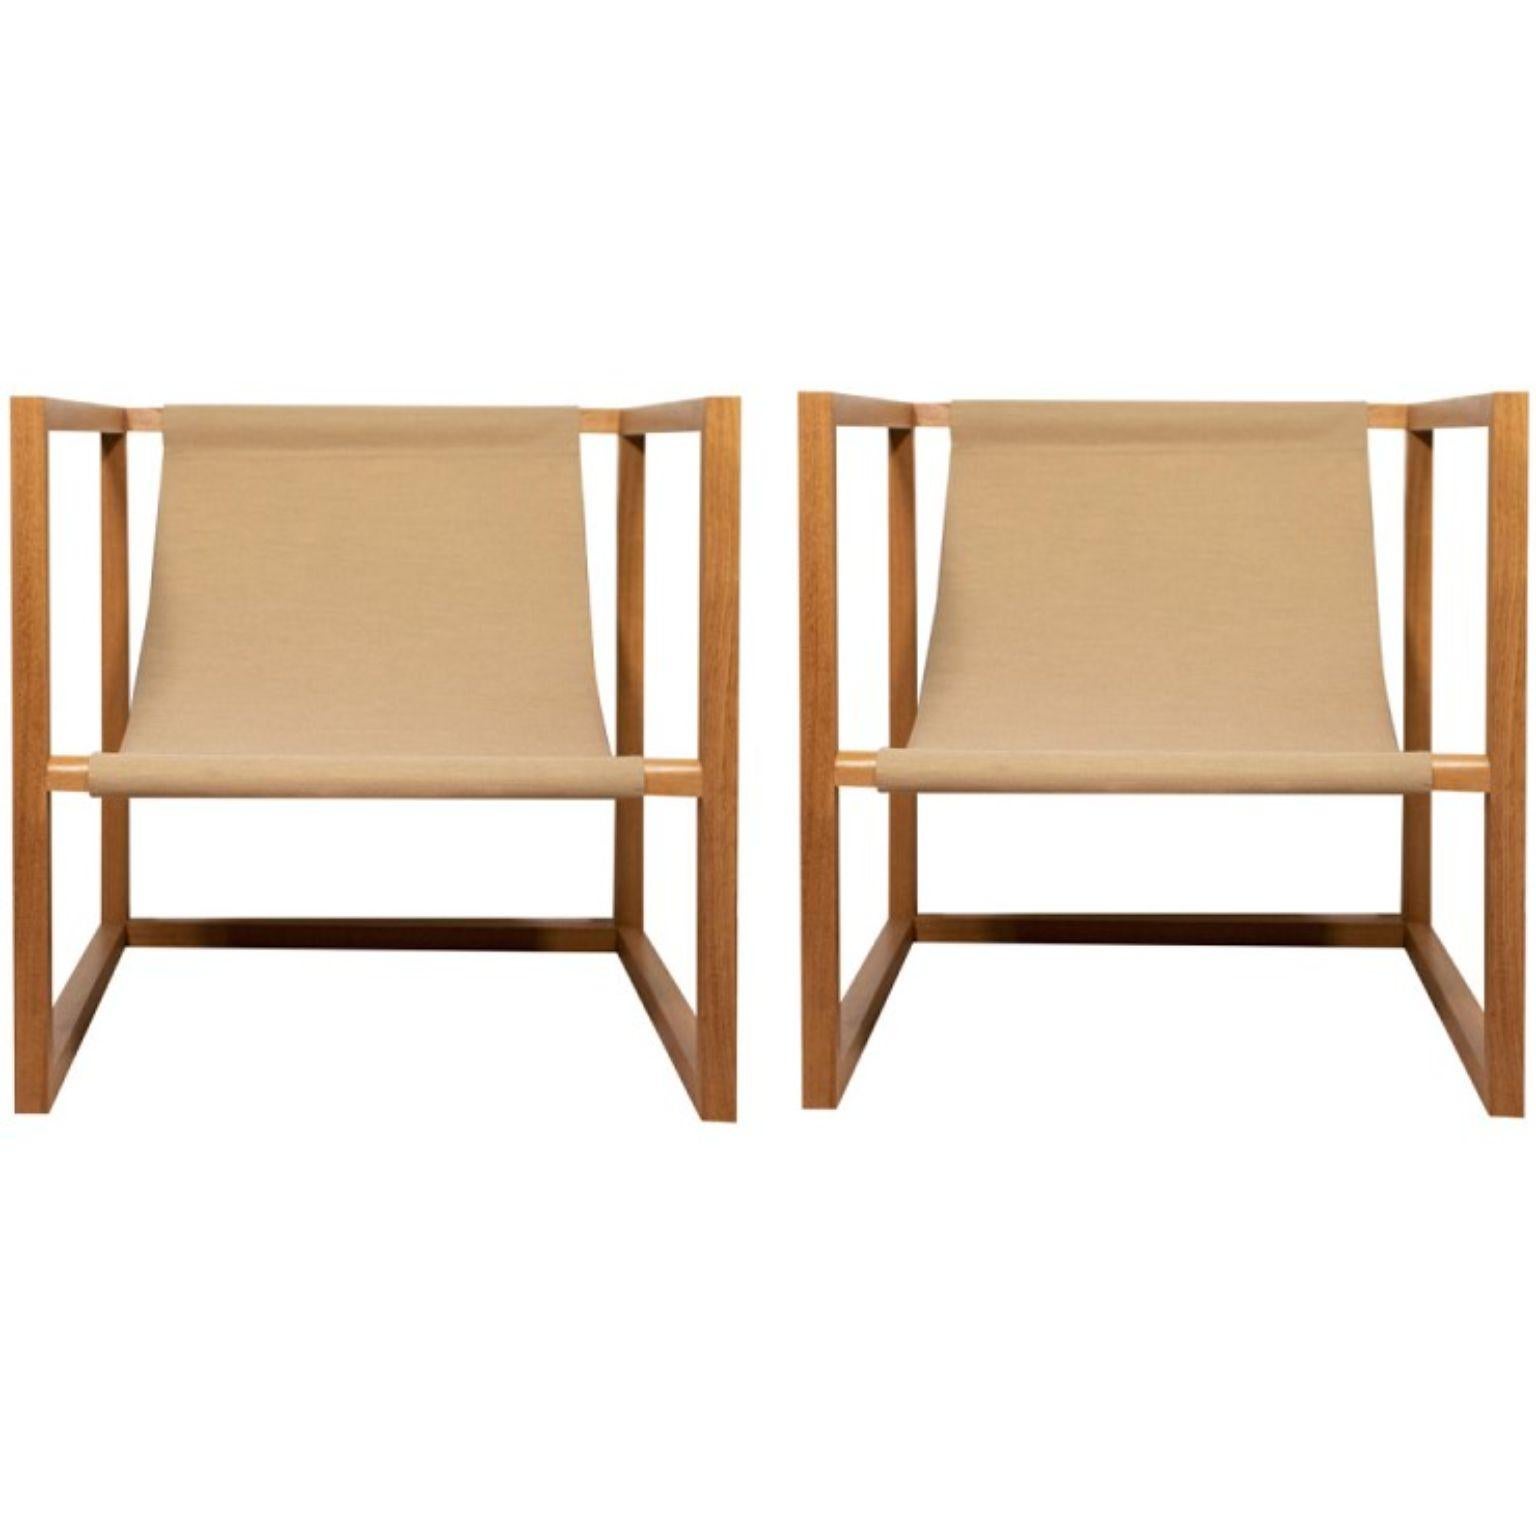 Set of 2 unique cube armchairs signed by Gigi Design
Dimensions: 70 x 70 x 70 cm
Materials: Iroko, fabric

Outdoor armchair in Iroko. Iroko is a wood suitable for exteriors. The rail moldings perfectly fit the back and legs. The canvas made by